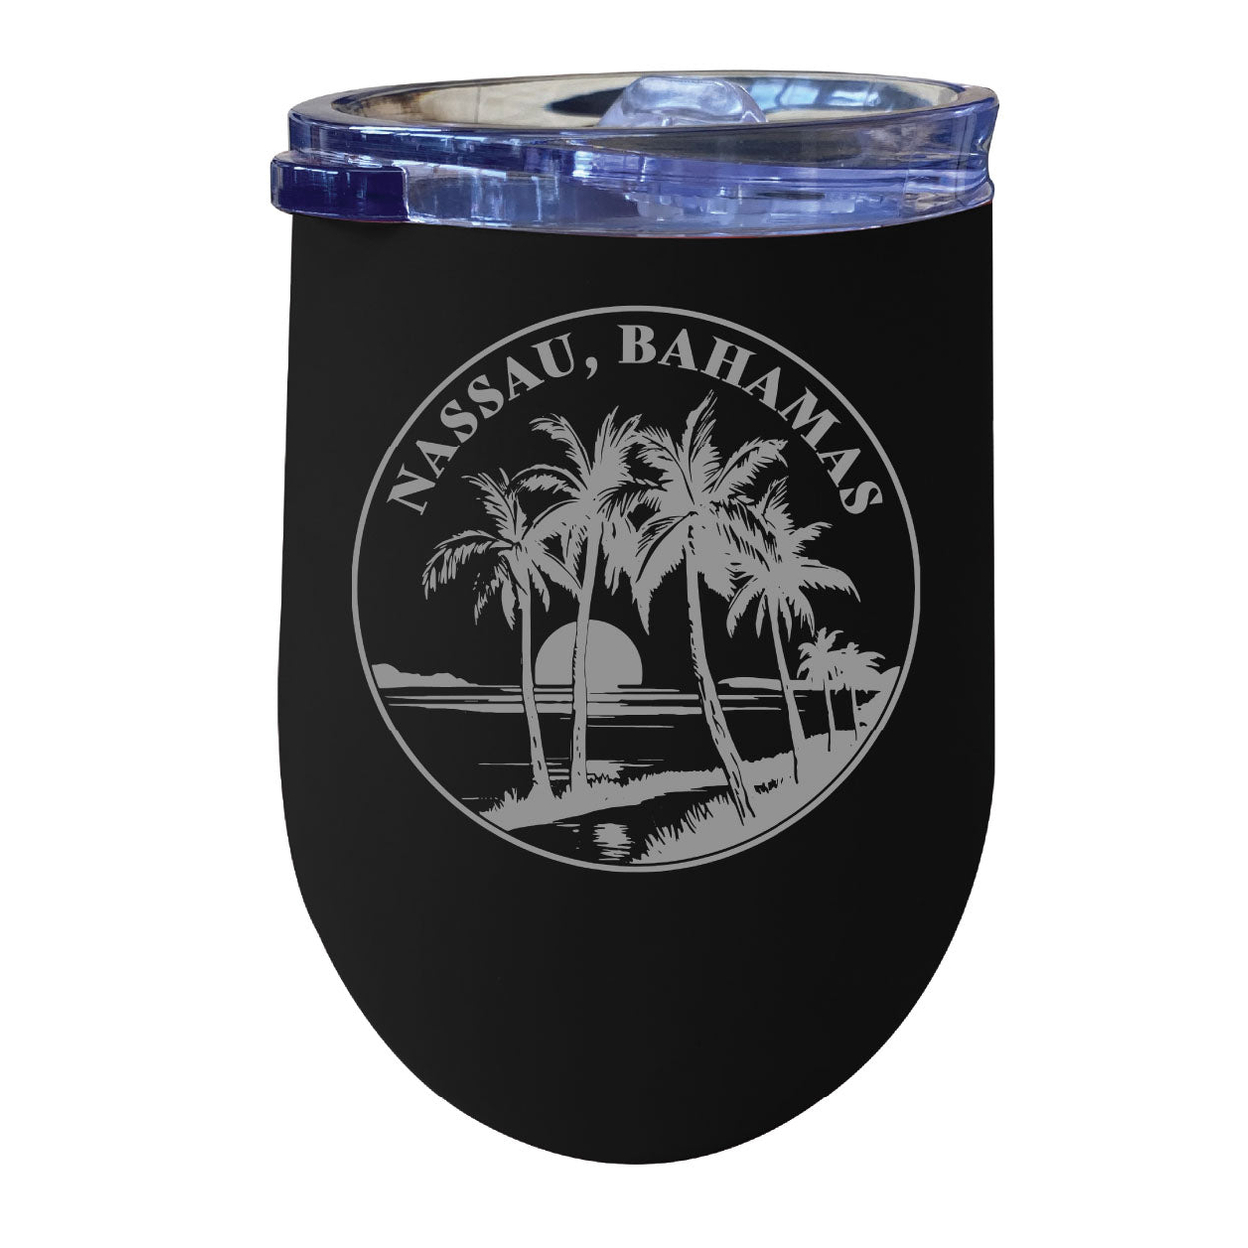 Nassau The Bahamas Souvenir 12 Oz Engraved Insulated Wine Stainless Steel Tumbler - Black,,4-Pack